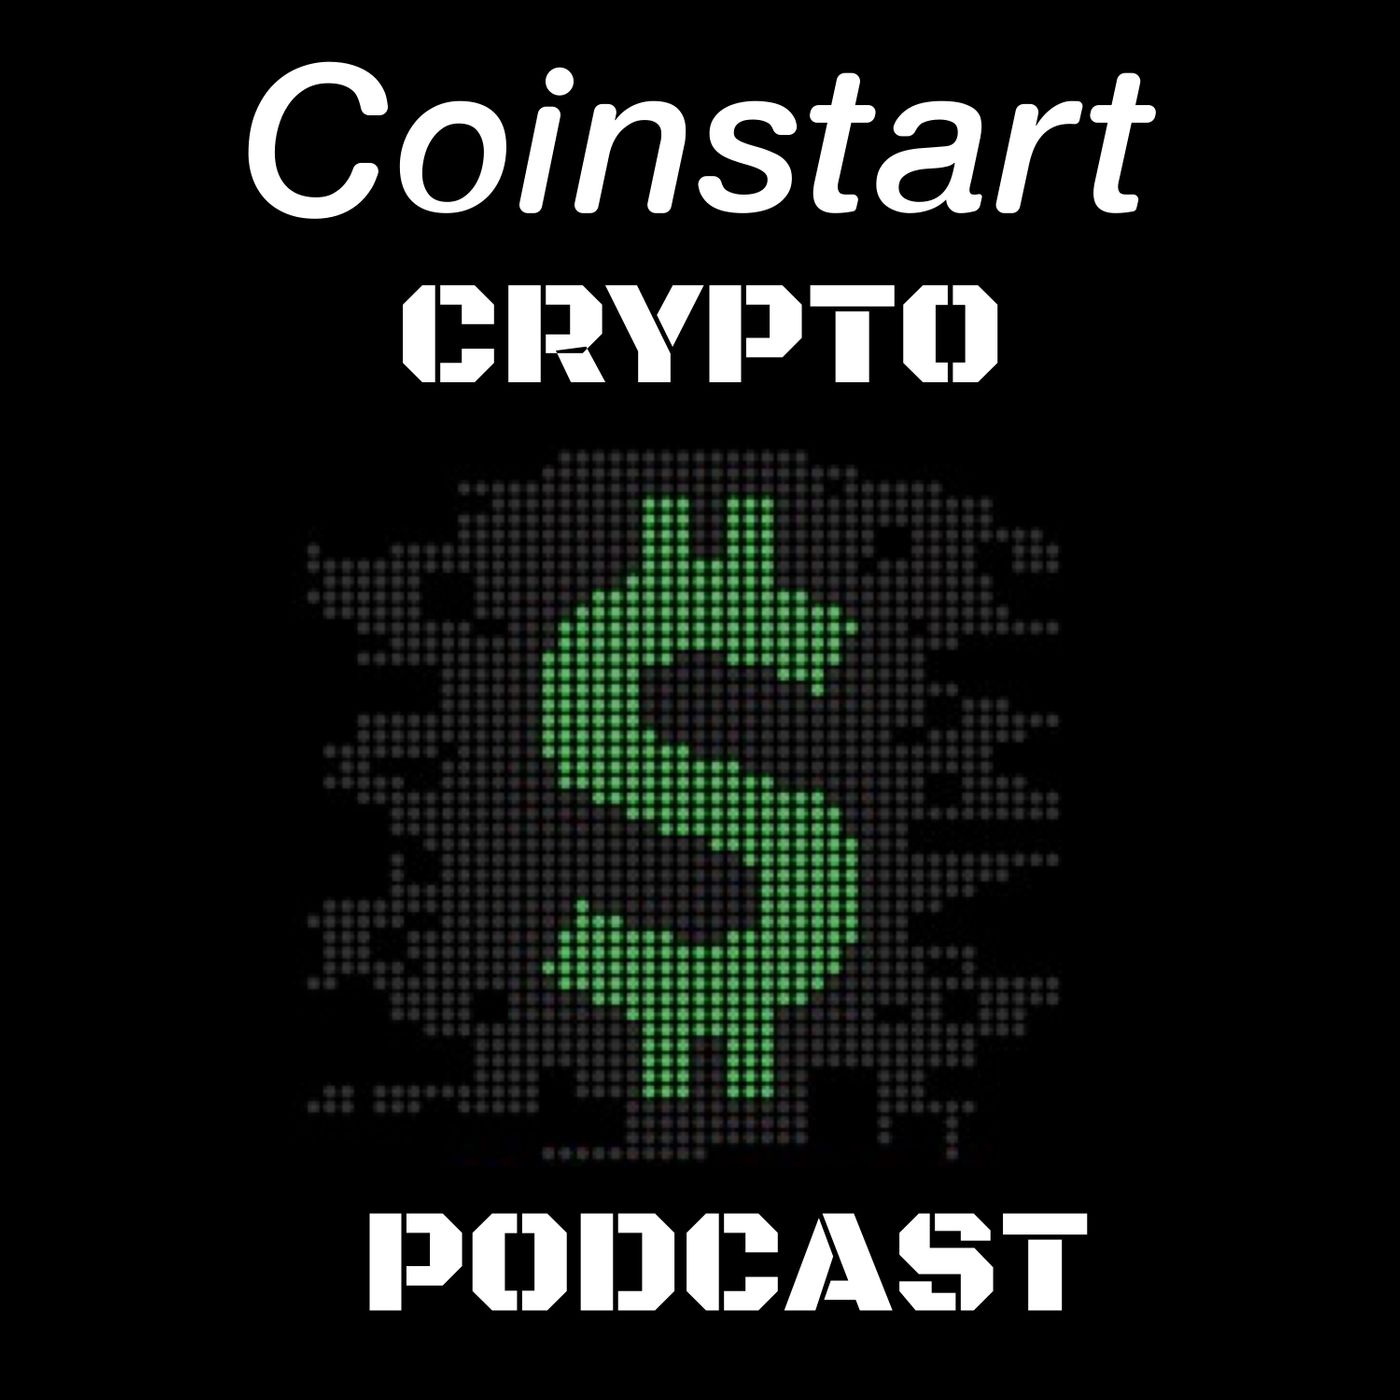 Coinstart Crypto Podcast - Blockchain, Cryptocurrency Insights & Interviews